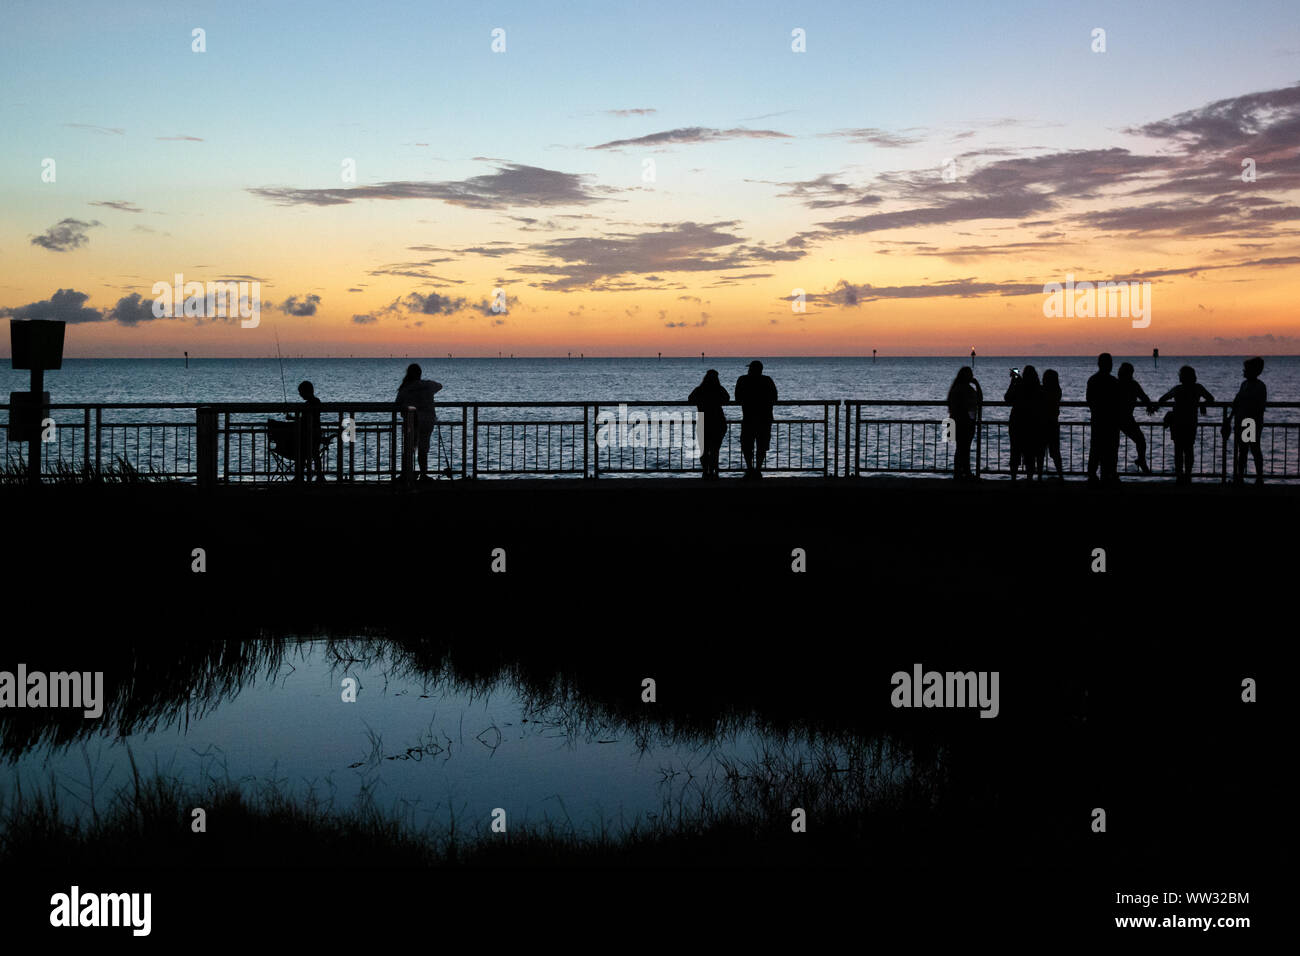 Silhouettes of people standing at the waterside watching the sunset at Hudson Beach, Florida Stock Photo